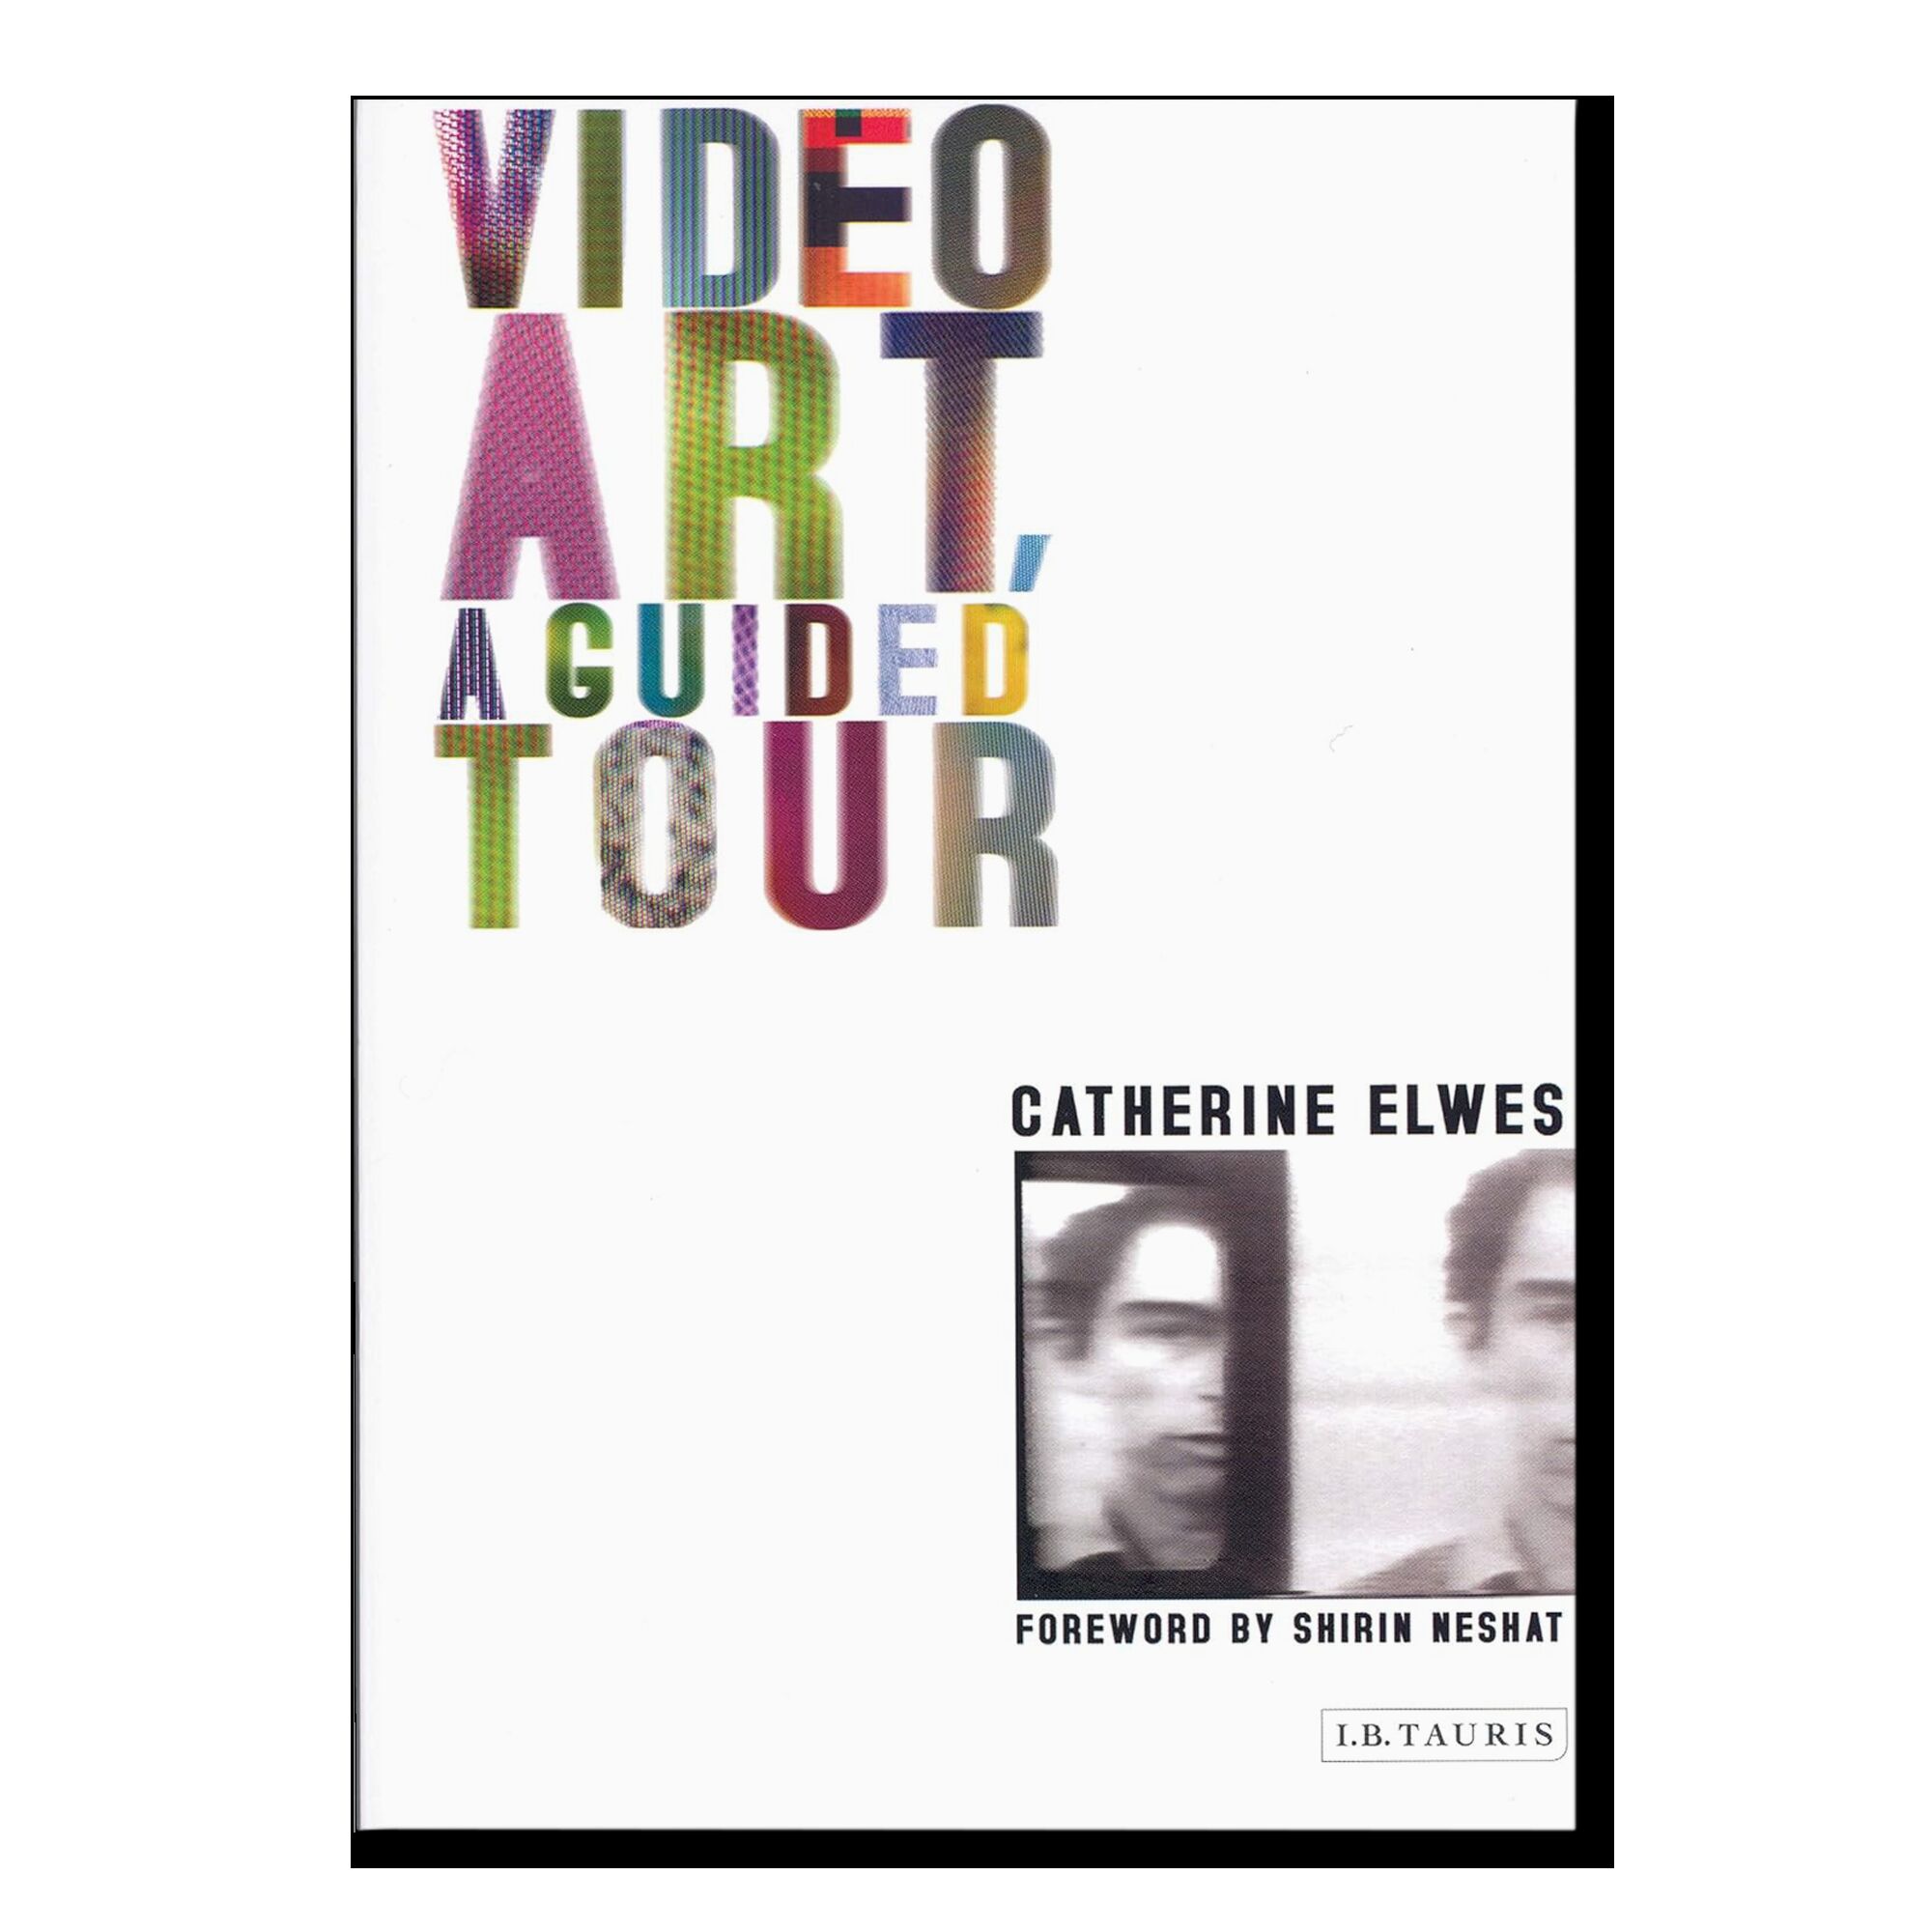 Video Art: A Guided Tour